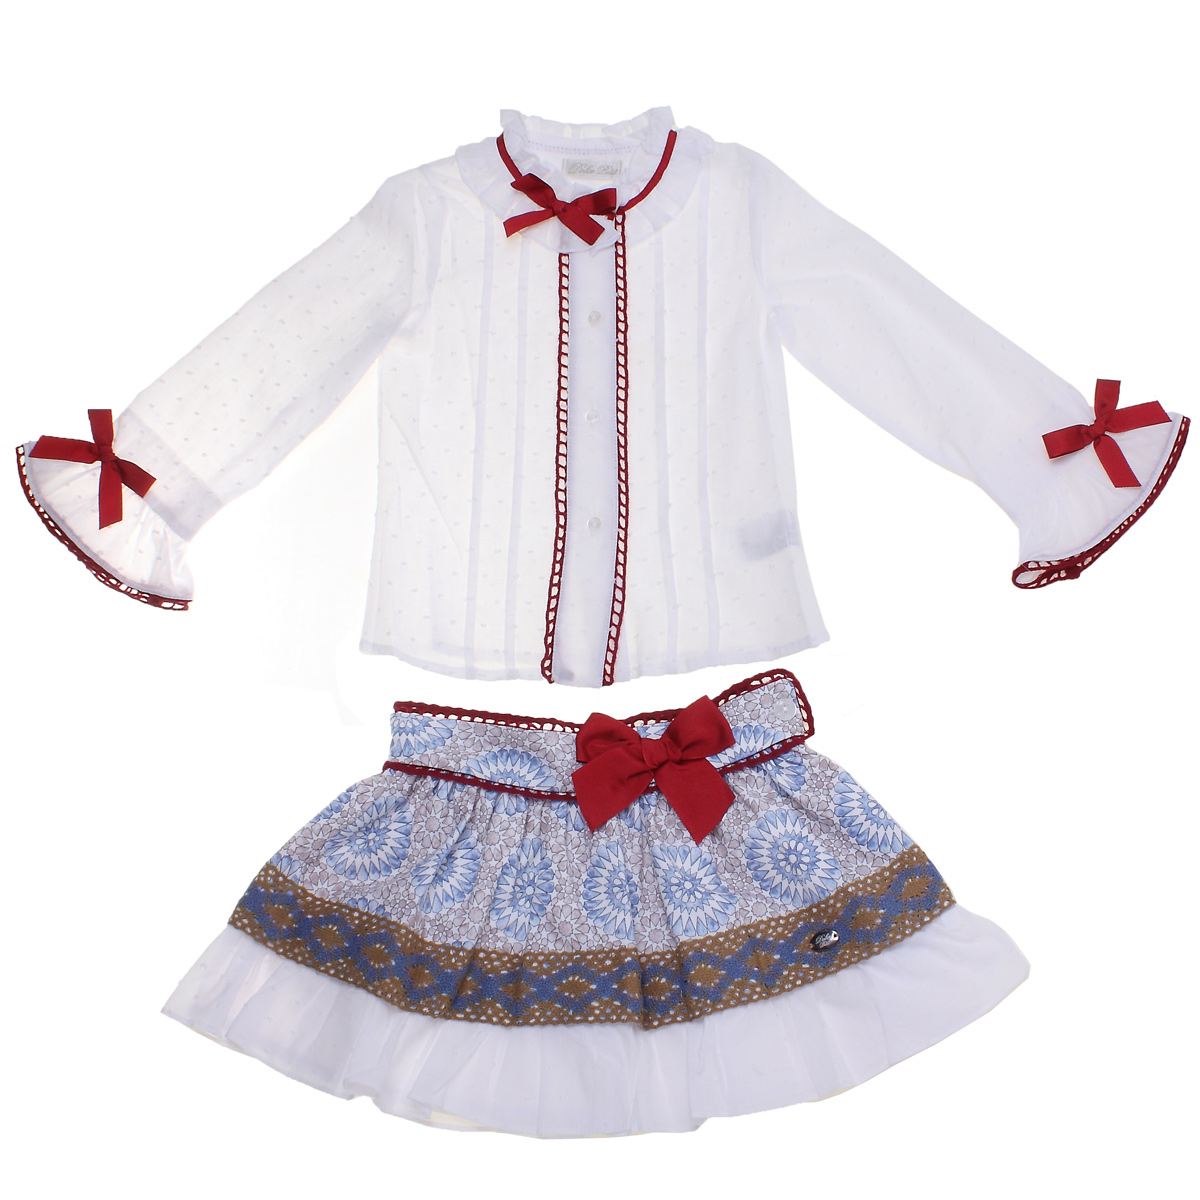 Spanish Dolce Petit Girls White Blouse And Blue Pattern Skirt Set Decorated  By Red Bows And Caramel Brown Lace